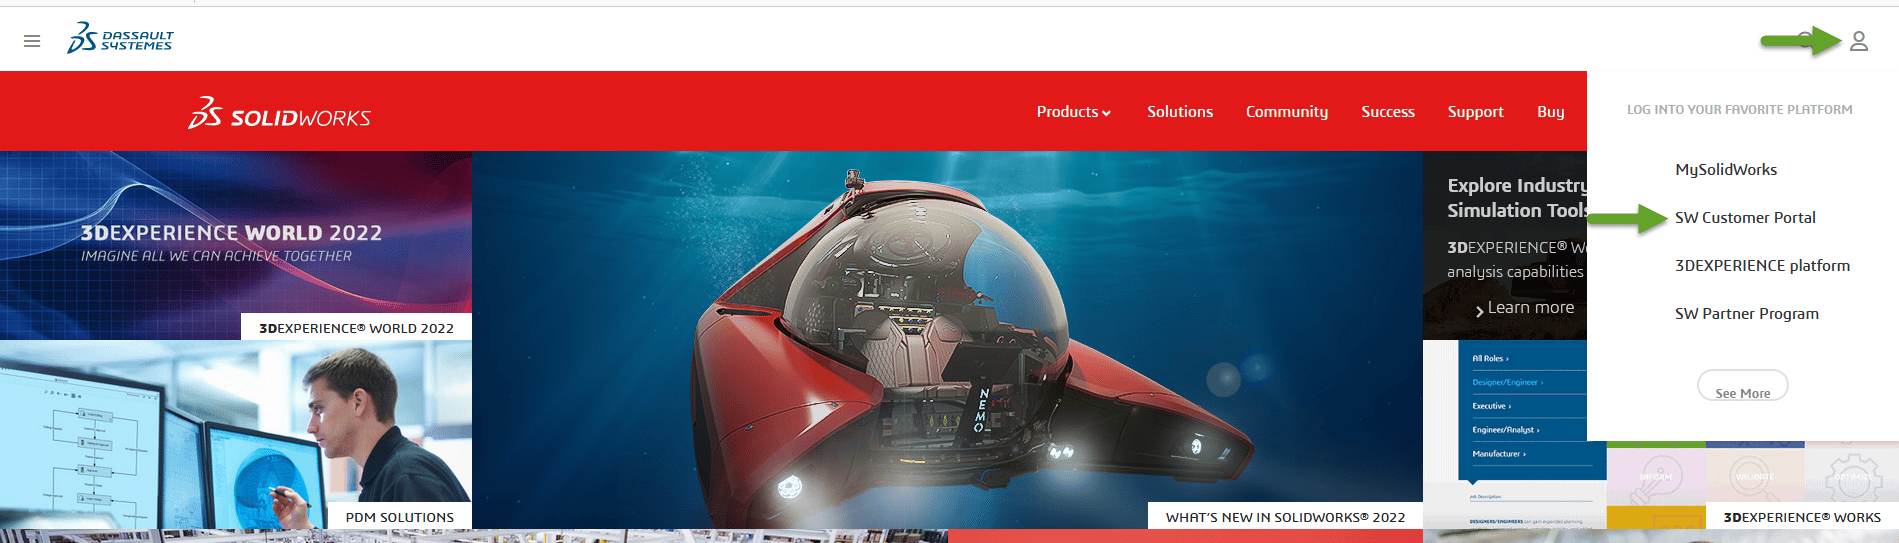 To download SOLIDWORKS 2023, navigate to the customer portal on the home page, as shown here.